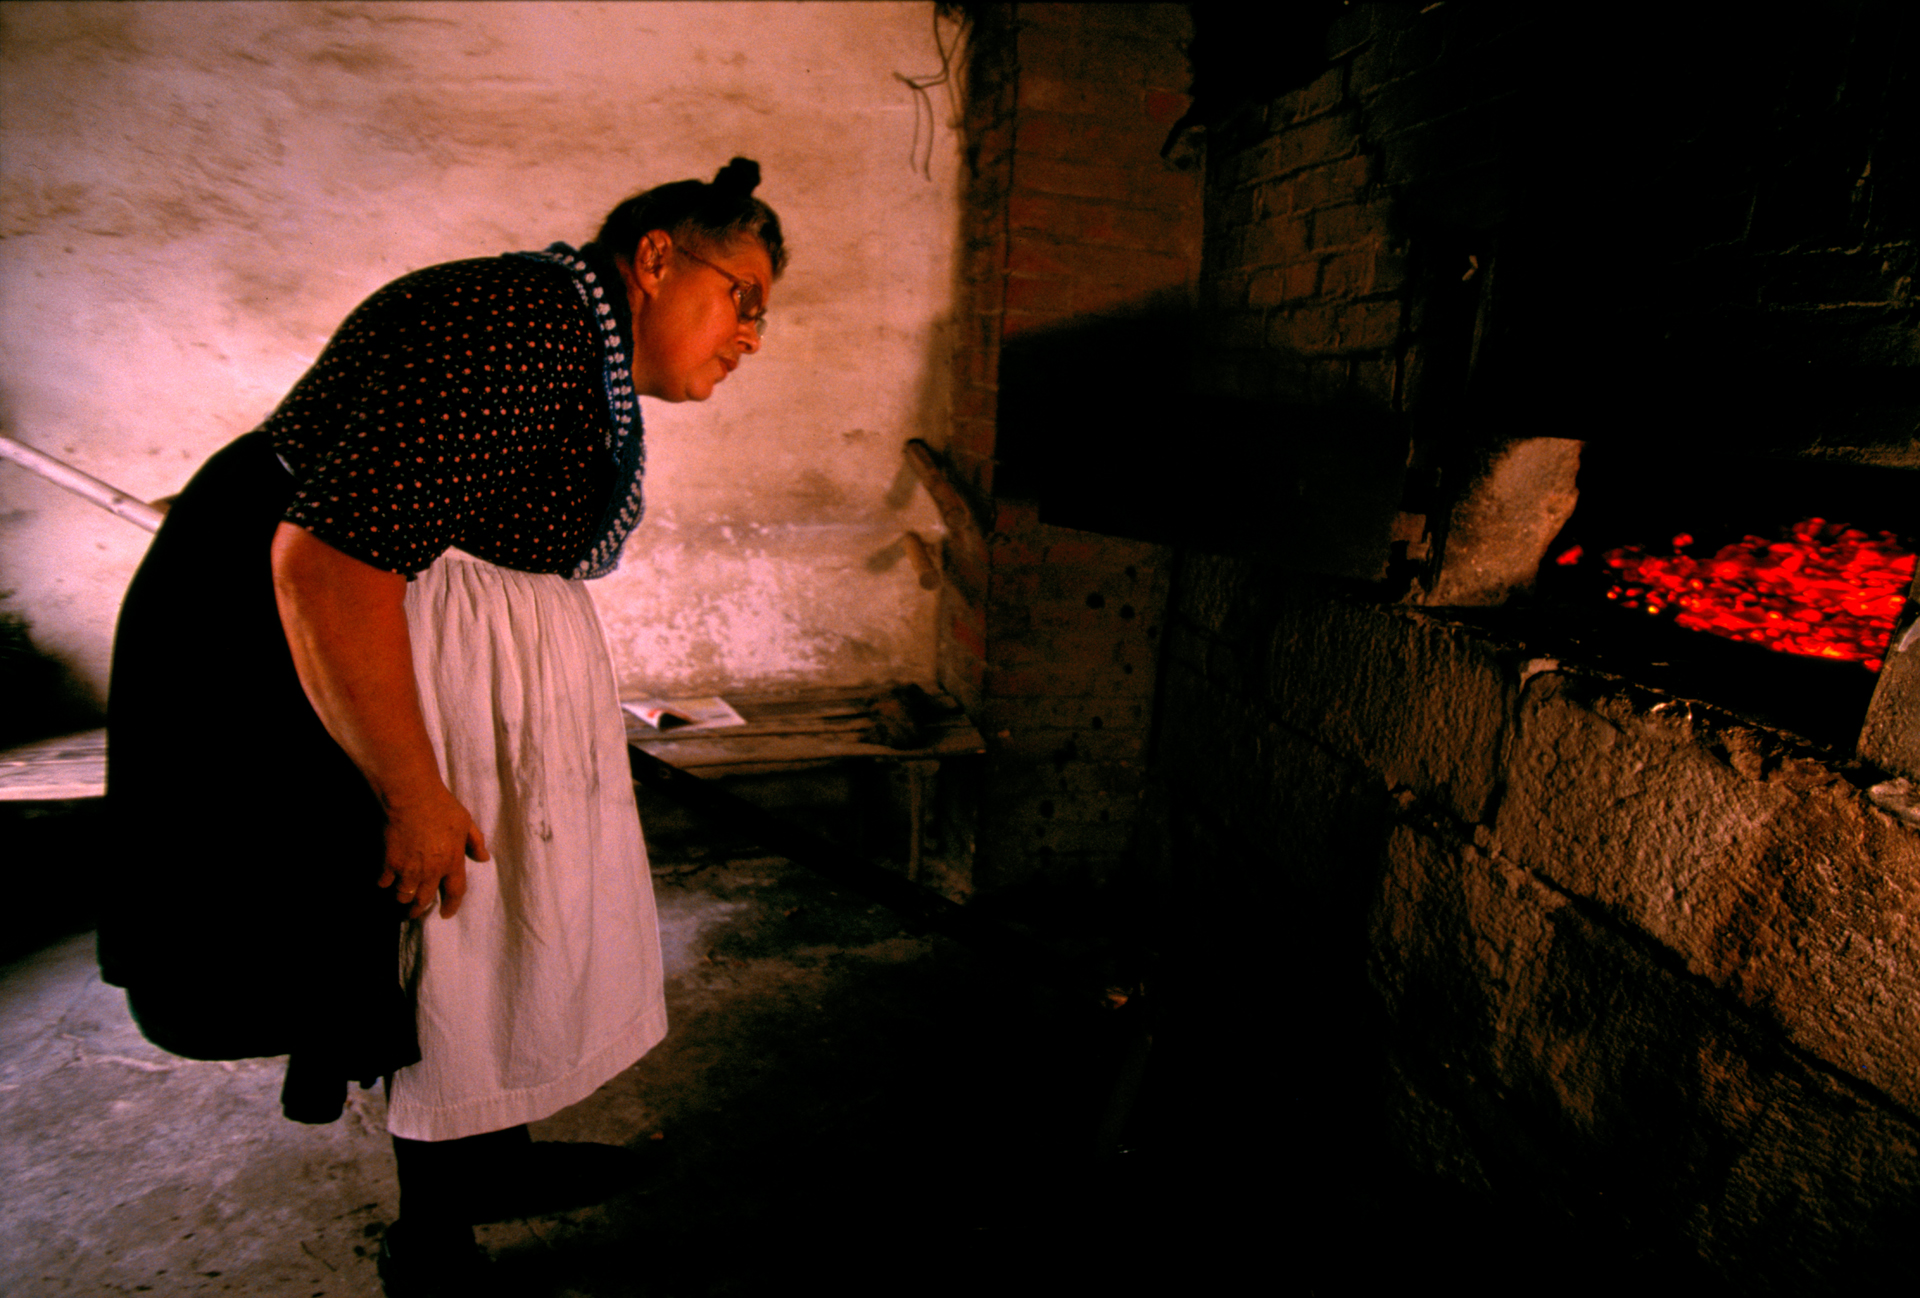  A villager peers into the fiery mouth of the communal oven.  Röllshausen, Germany  